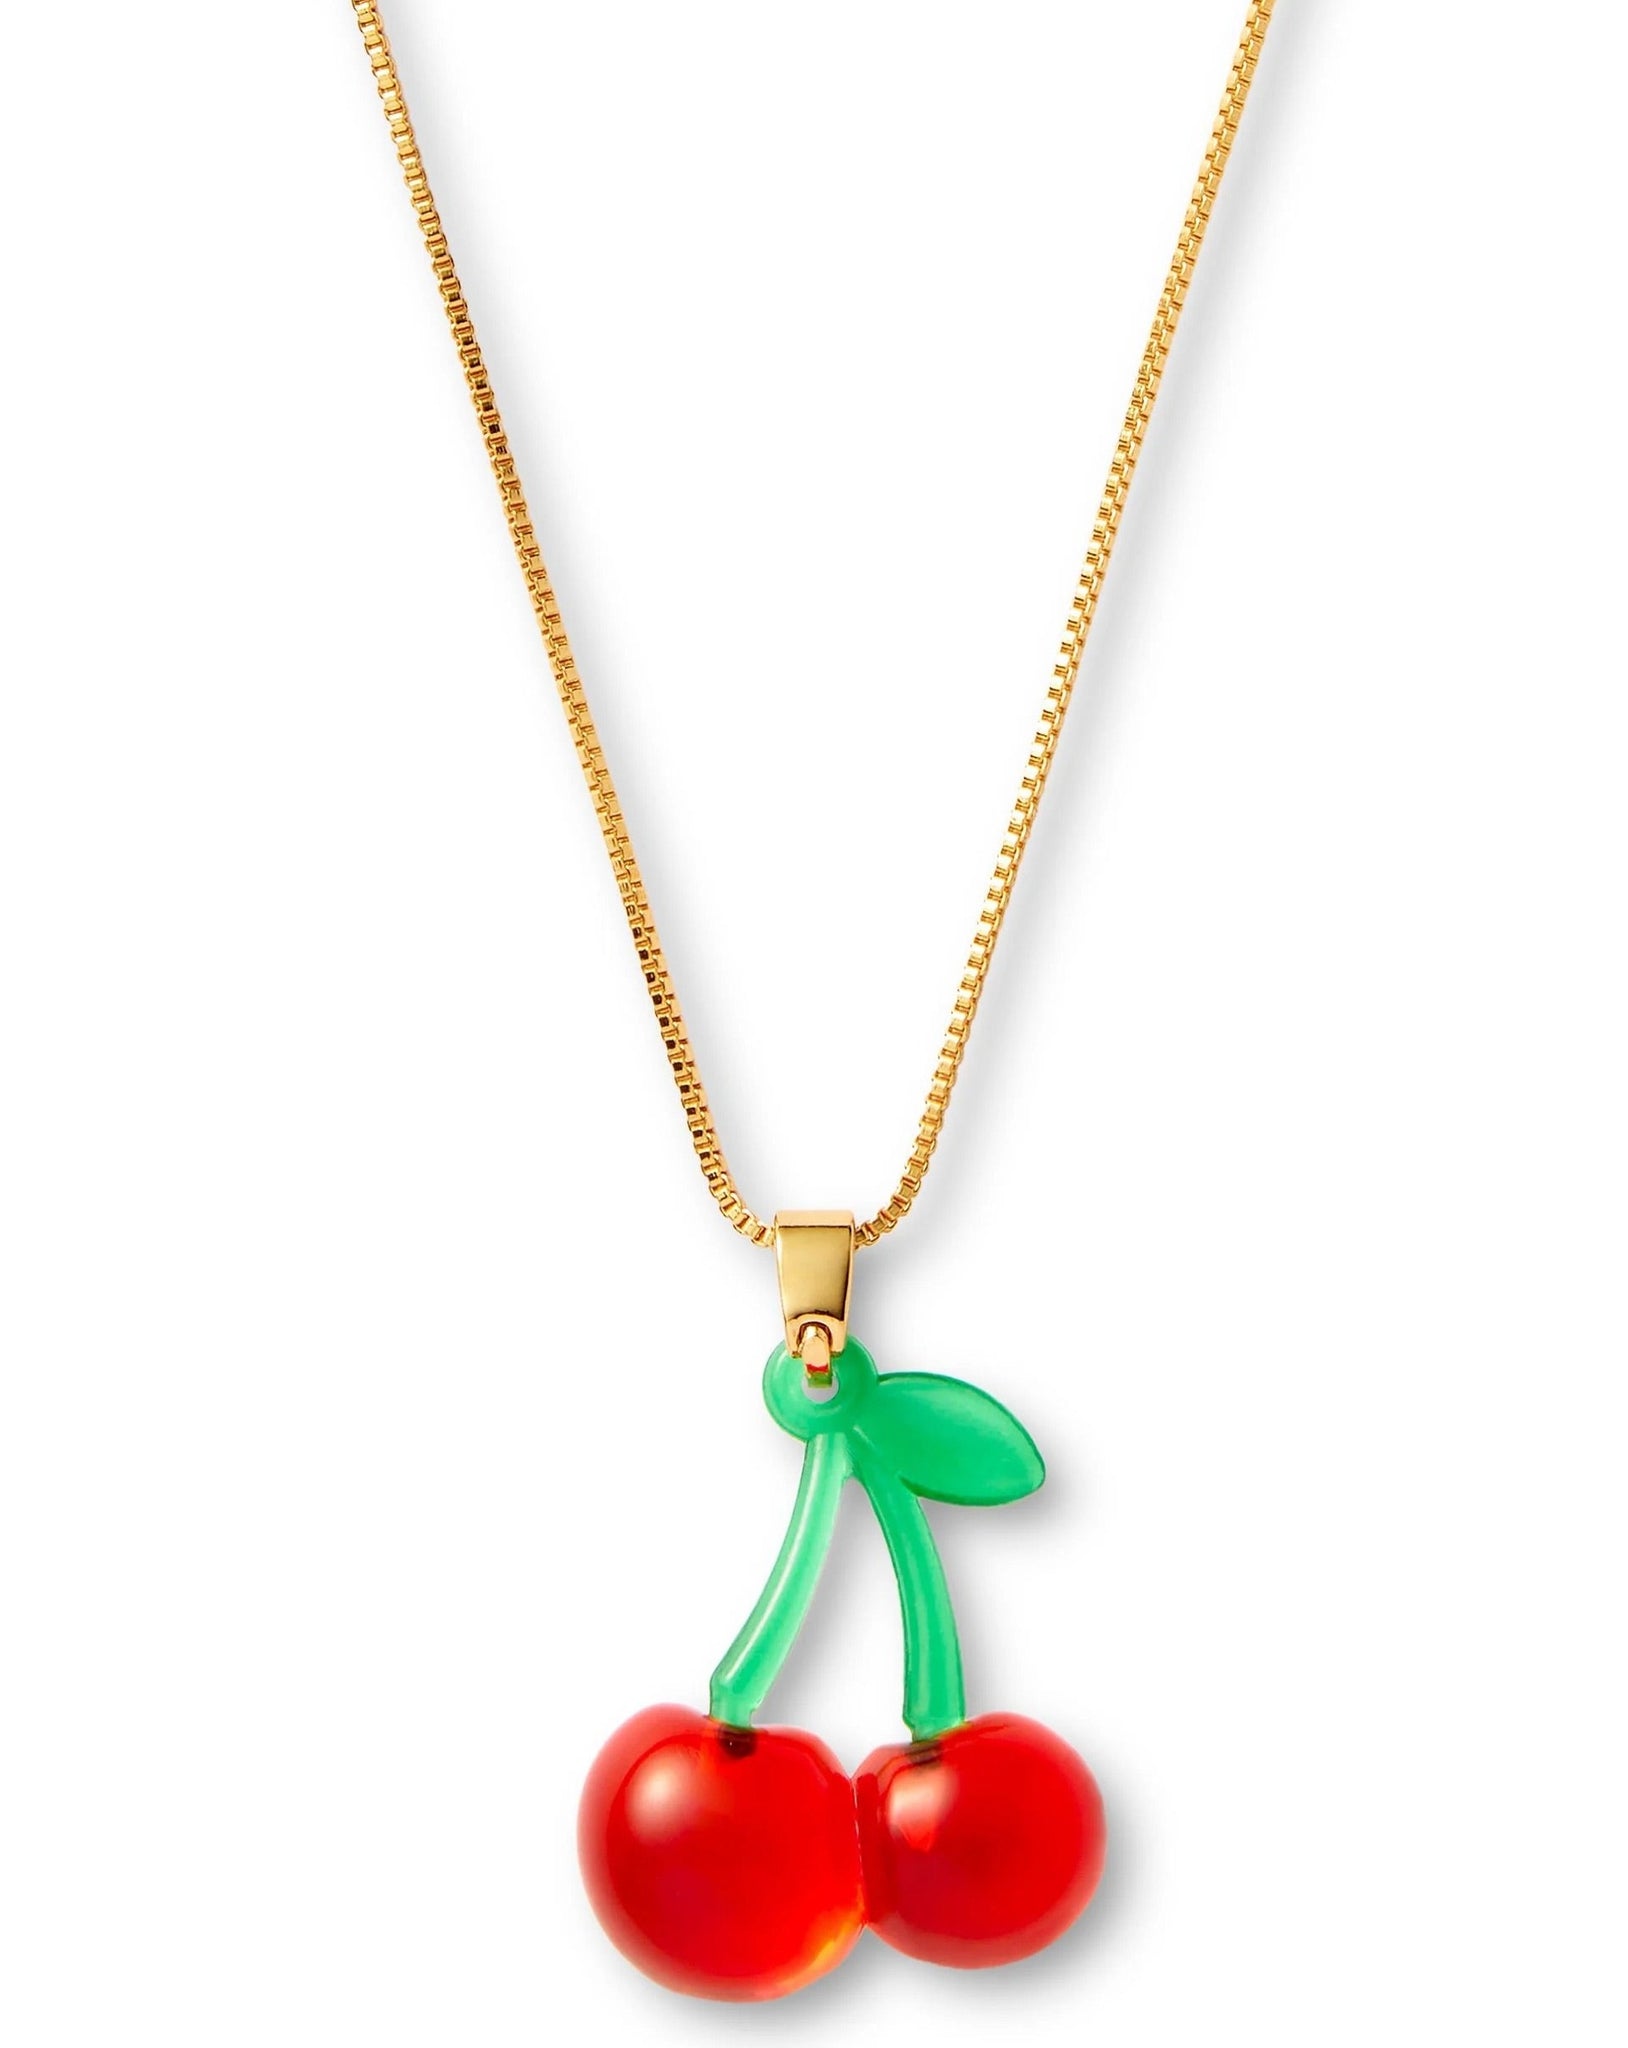 Pop the Cherry necklace by Crystal Haze